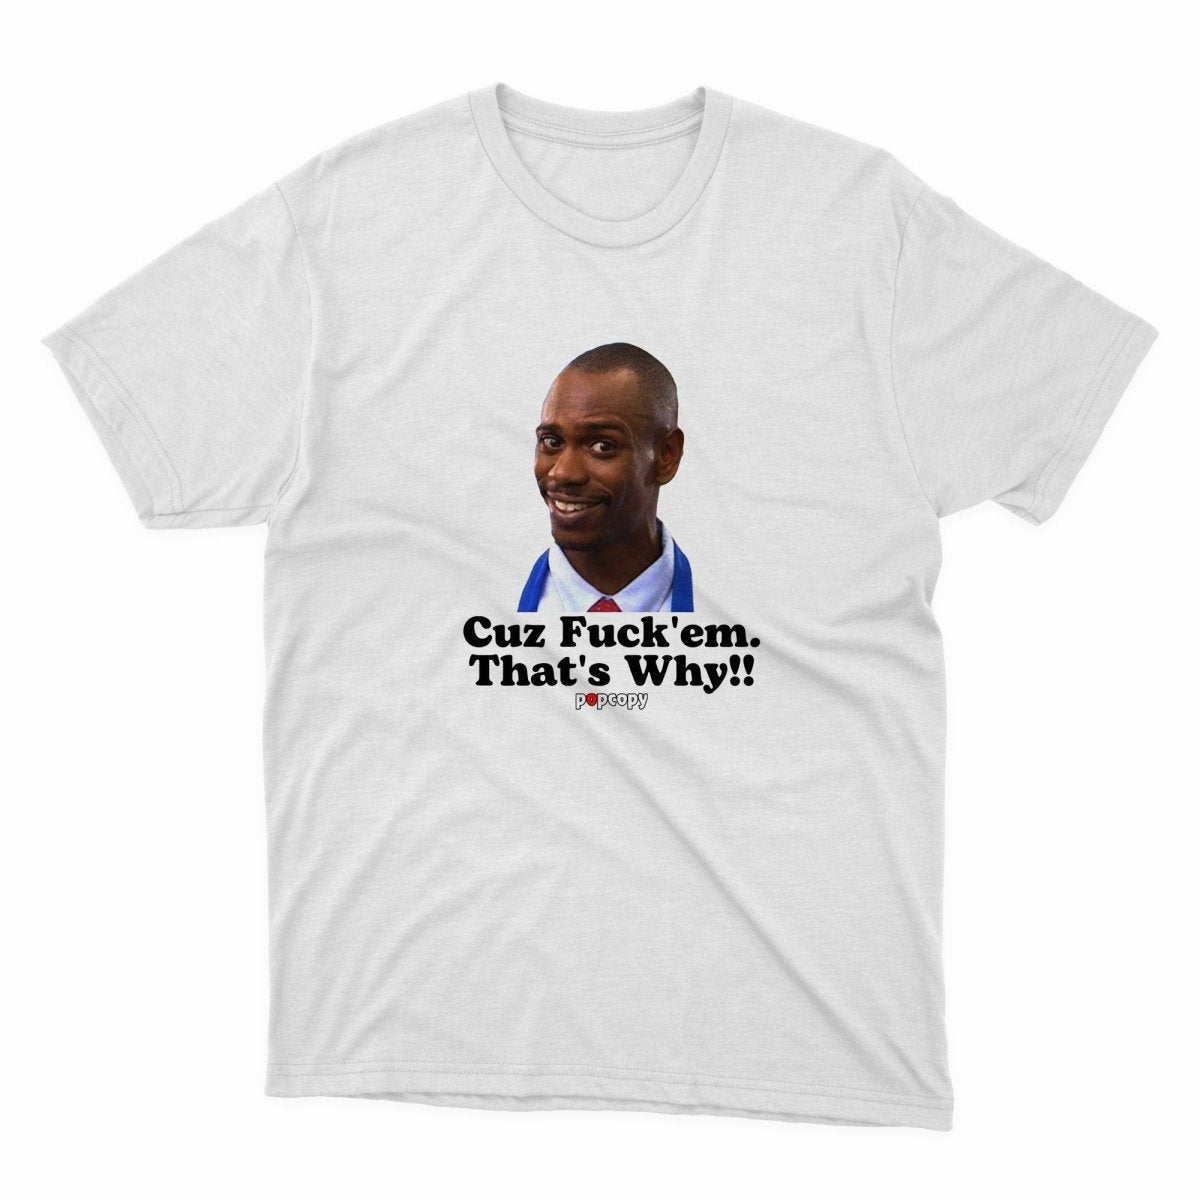 Dave Chappelle Popcopy Shirt - stickerbullDave Chappelle Popcopy ShirtShirtsPrintifystickerbull71477696711046903425WhiteSa white t - shirt with a picture of a black man